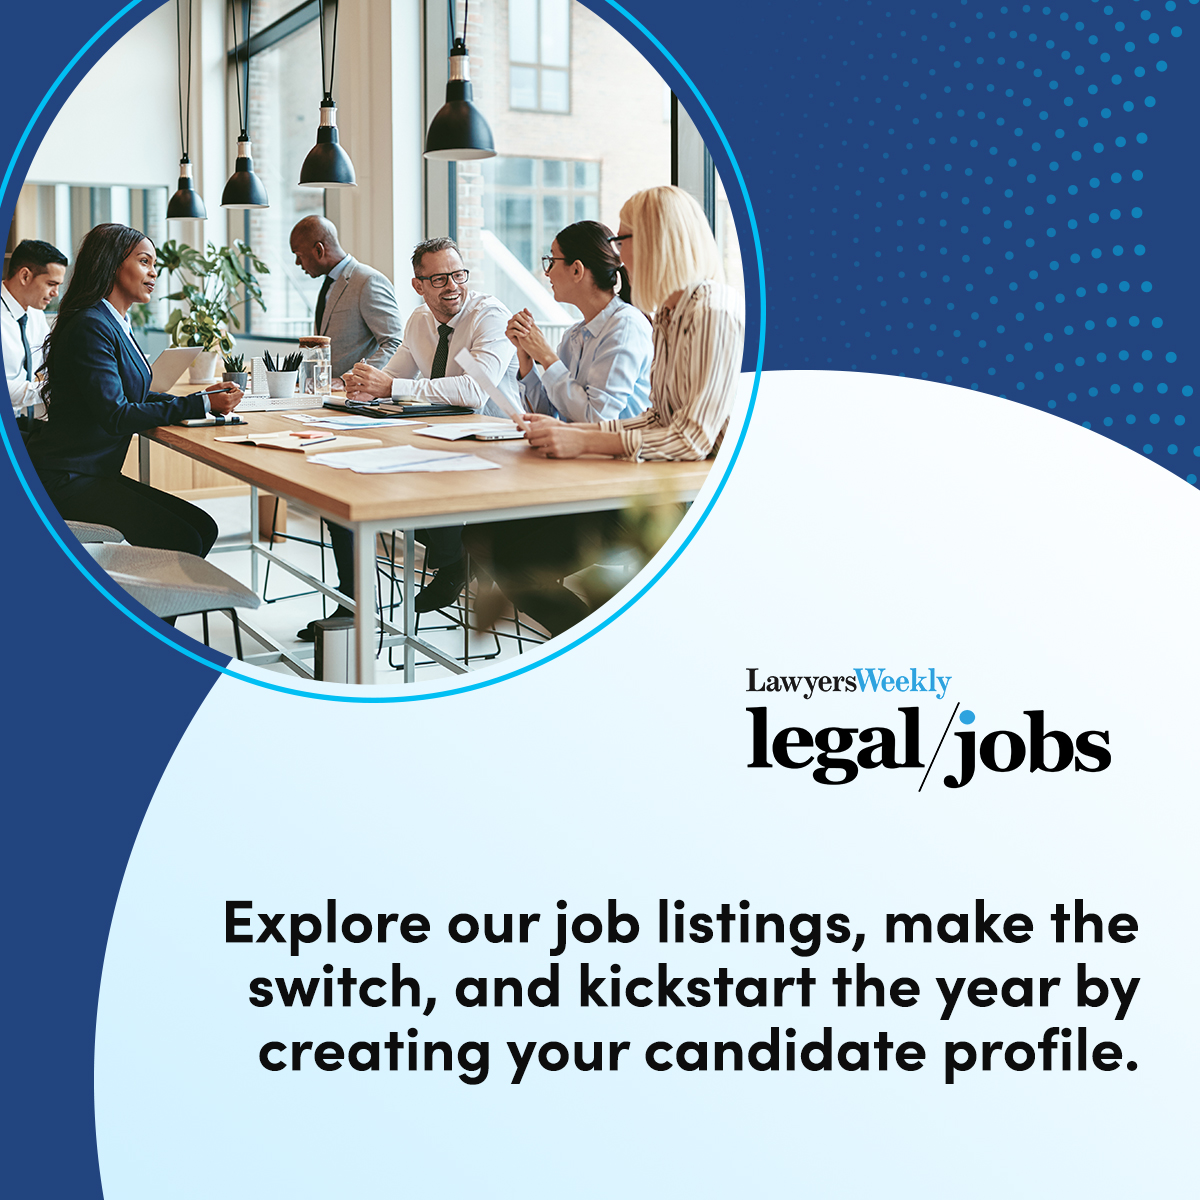 Dive into exciting career prospects and professional growth within the legal sector. Your gateway to success starts here – explore our featured job listings at bit.ly/429uBjk 
#careergrowth #maketheswitch